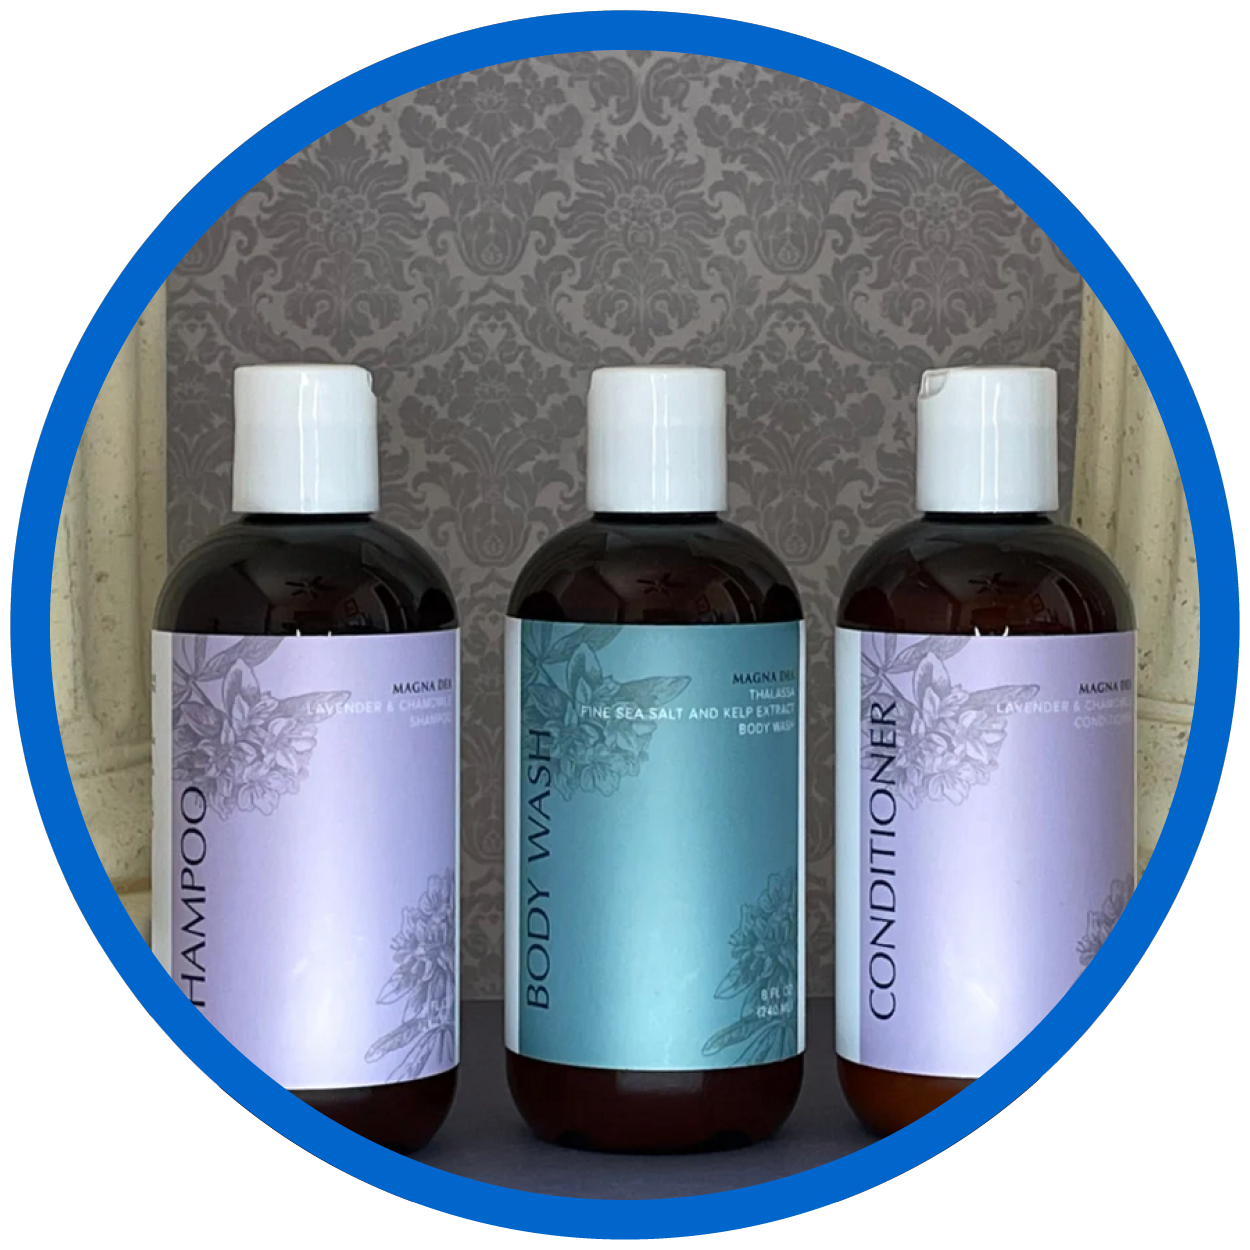 Three bottles of product: Shampoo, Body Wash, and Conditioner with blue and lavender floral designs.